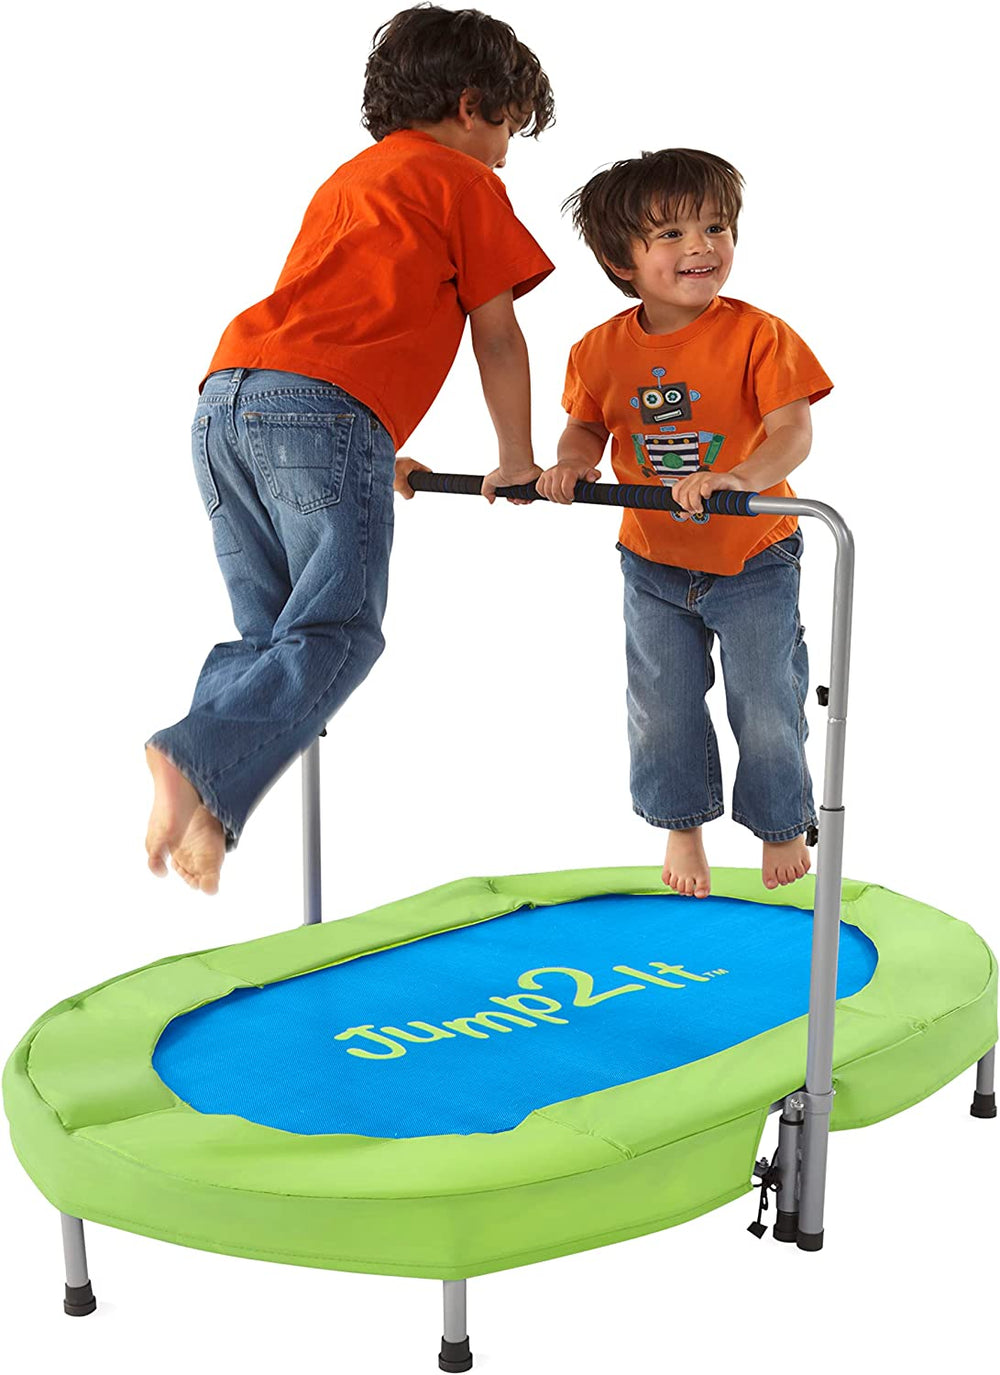 Two children with medium light skin tone and short brown hair are wearing orange t-shirts and jeans. One is on either side of the handlebars of the Jump2It Trampoline, holding on and in mid-air.